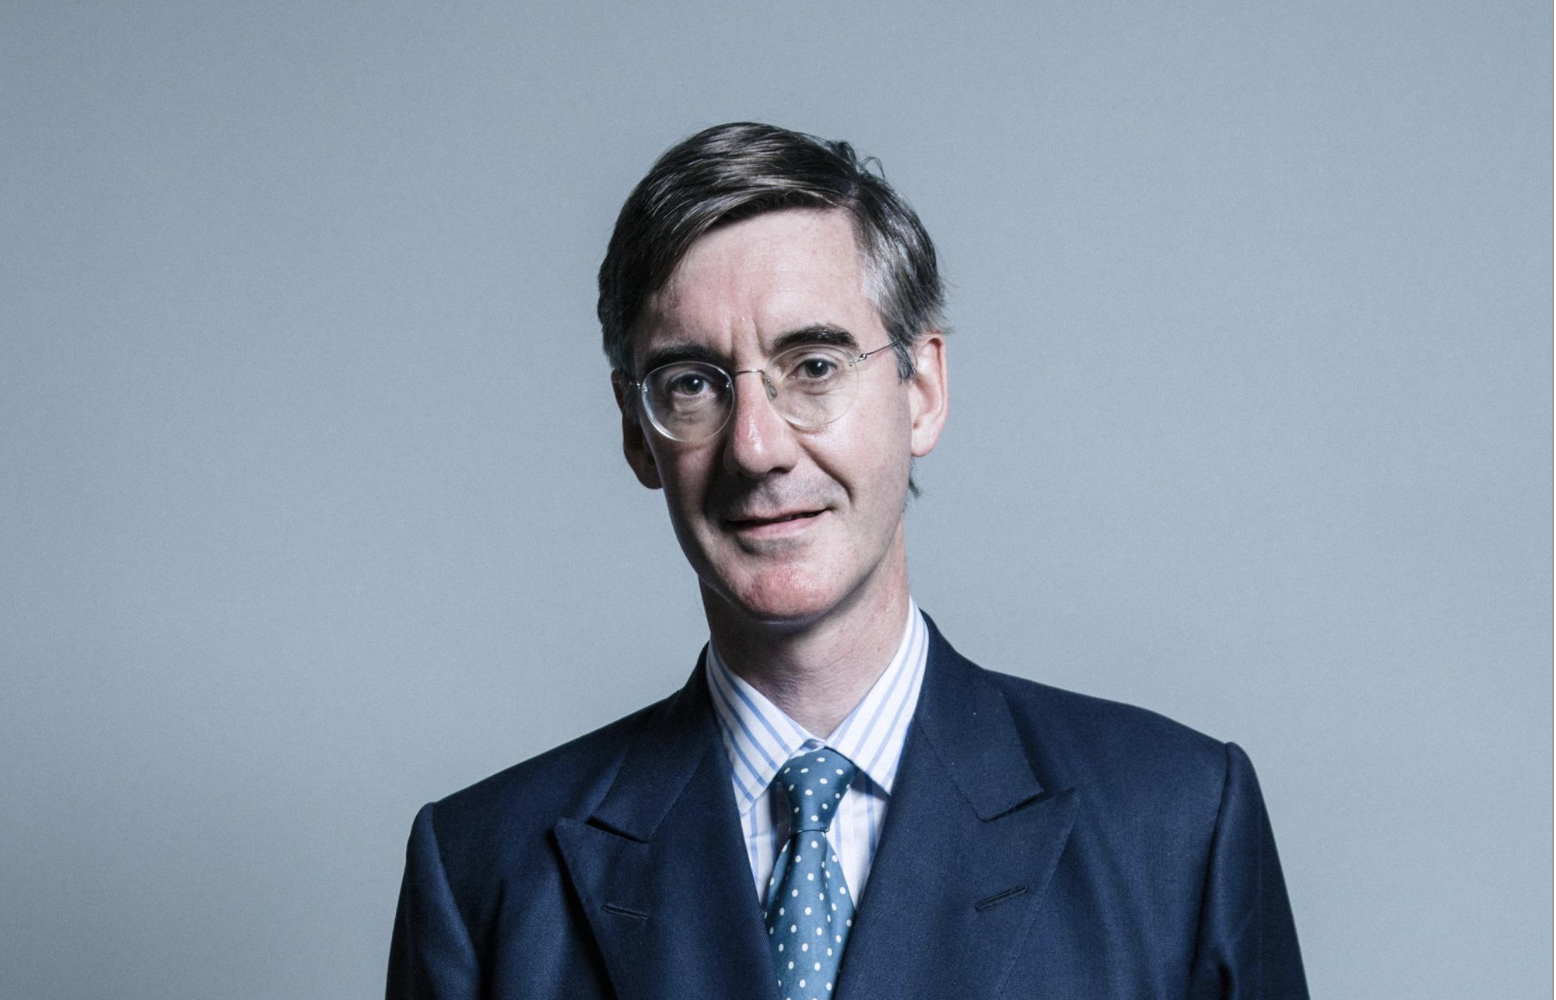 Rees-Mogg Urges Civil Servants to Make Use of London Office Space